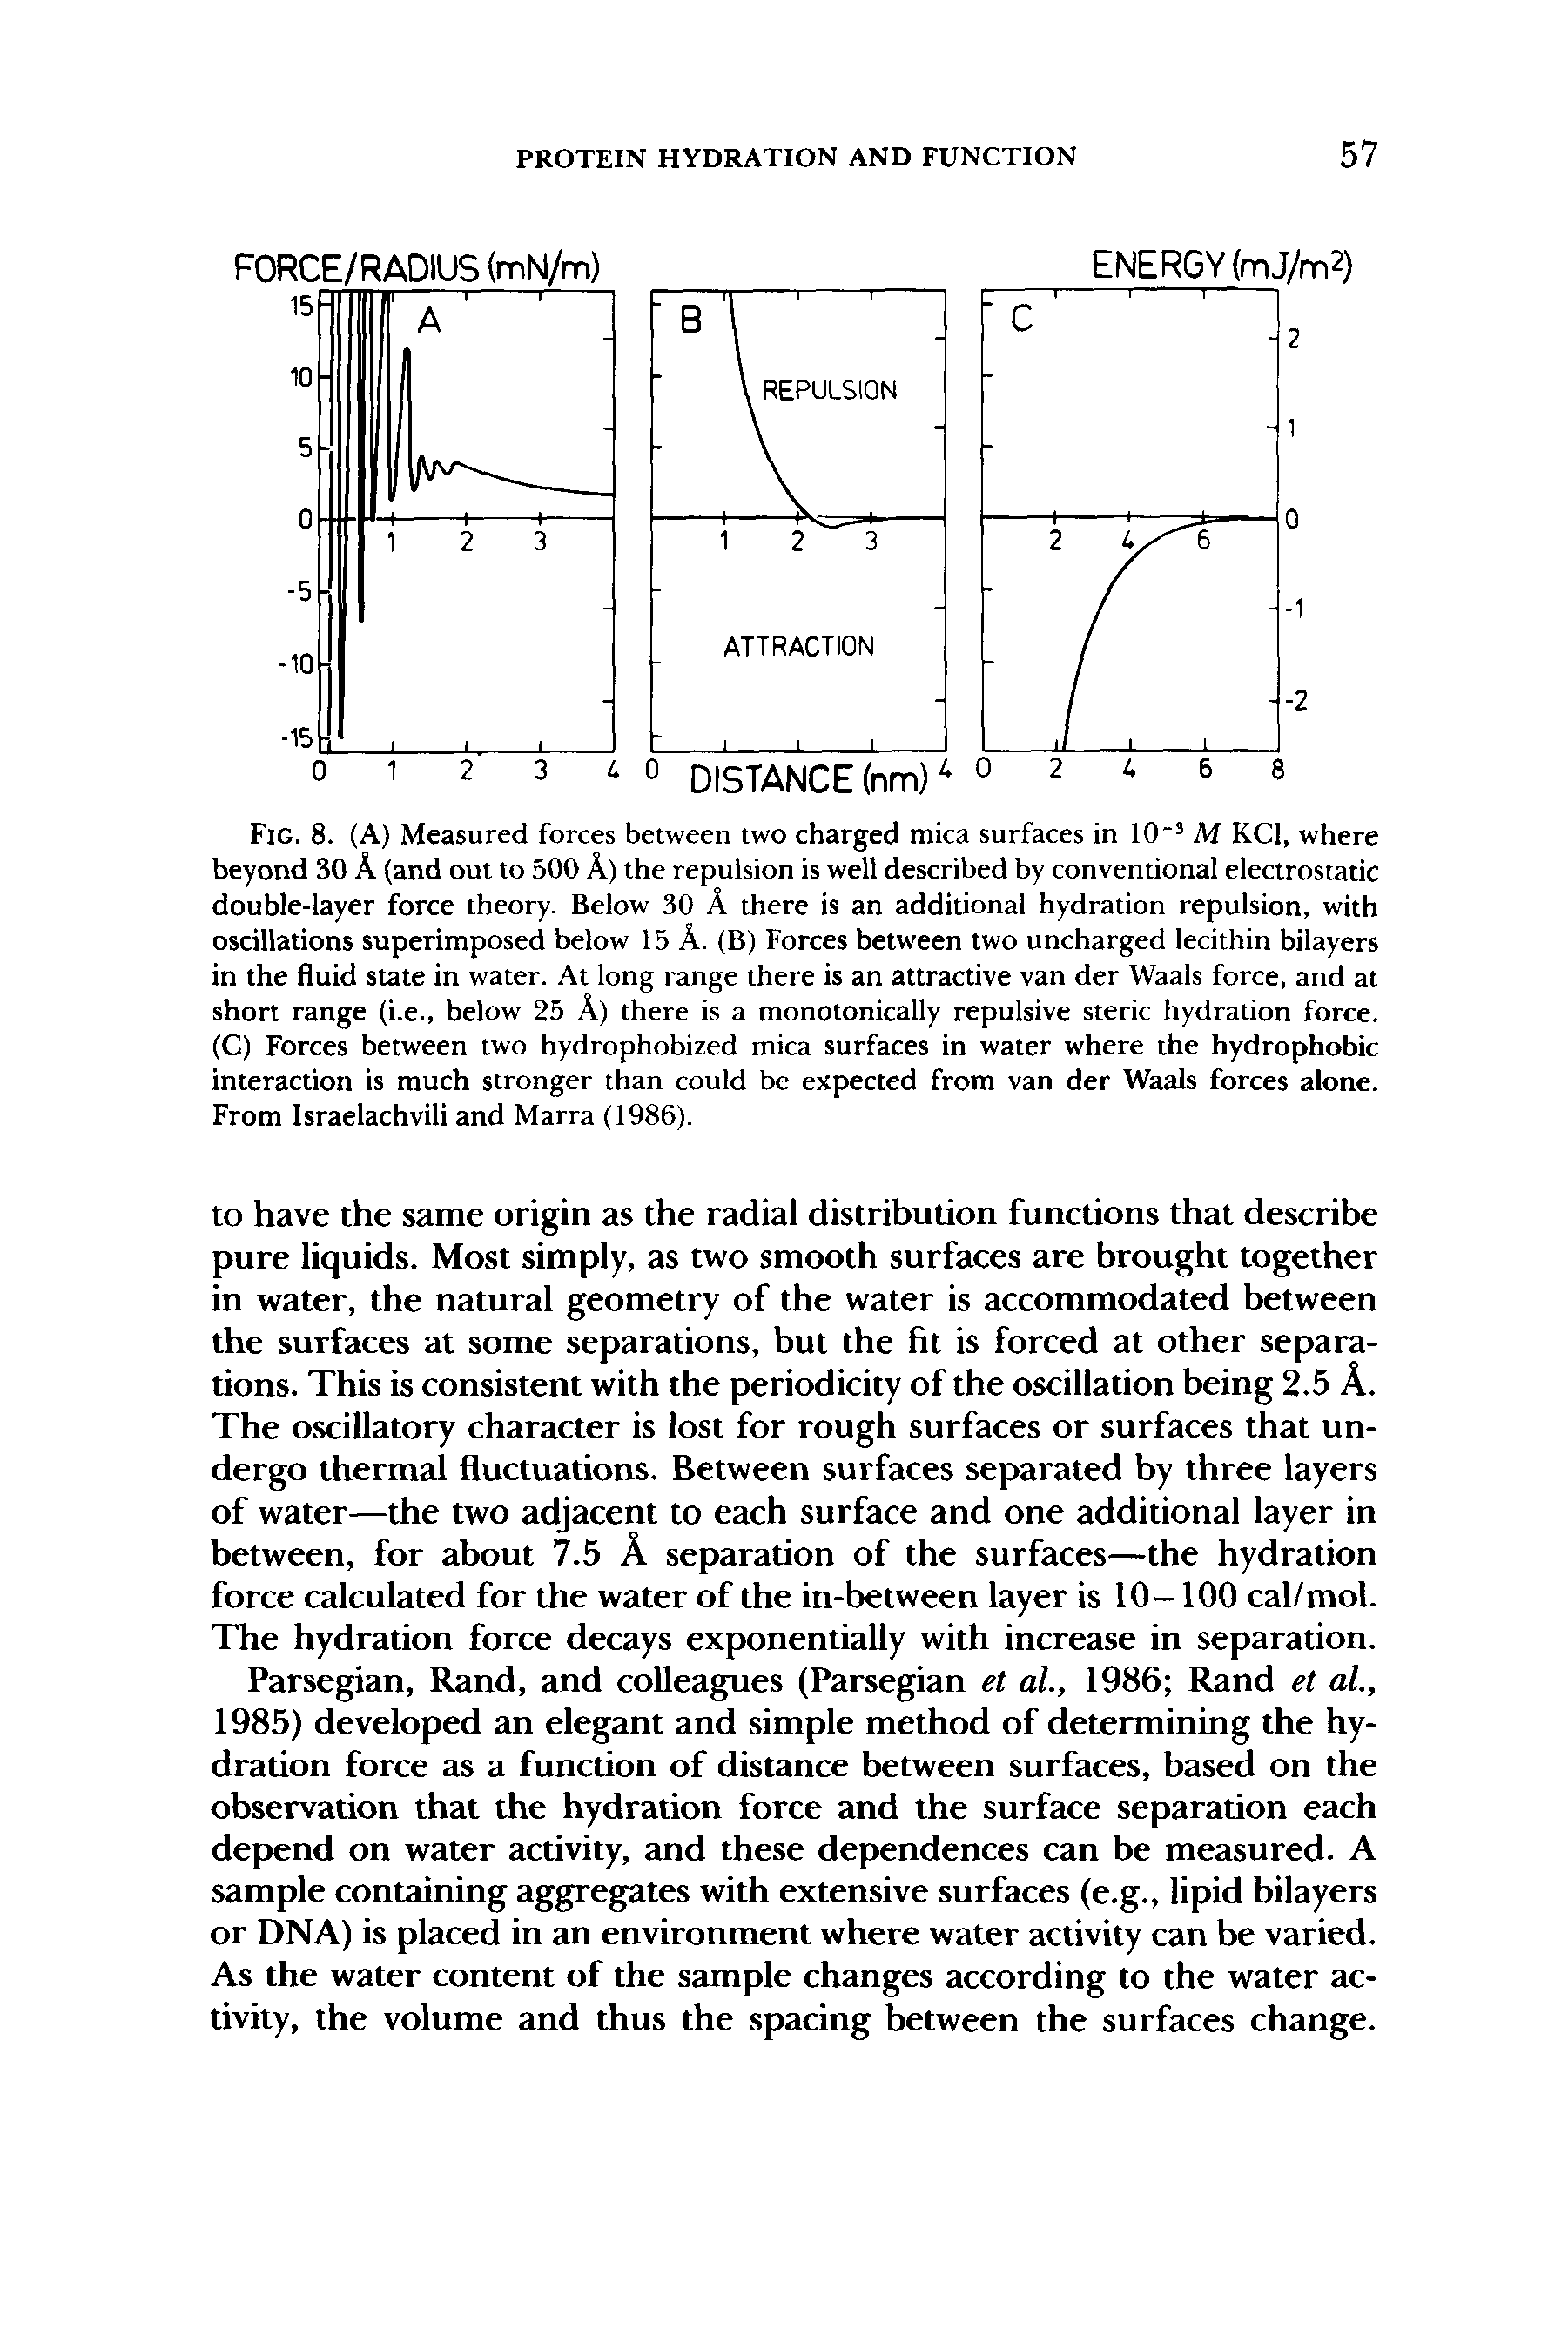 Fig. 8. (A) Measured forces between two charged mica surfaces in 10" M KCl, where beyond 30 A (and out to 500 A) the repulsion is well described by conventional electrostatic double-layer force theory. Below 30 A there is an additional hydration repulsion, with oscillations superimposed below 15 A. (B) Forces between two uncharged lecithin bilayers in the fluid state in water. At long range there is an attractive van der Waals force, and at short range (i.e., below 25 A) there is a monotonically repulsive steric hydration force. (C) Forces between two hydrophobized mica surfaces in water where the hydrophobic interaction is much stronger than could be expected from van der Waals forces alone. From Israelachvili and Marra (1986).